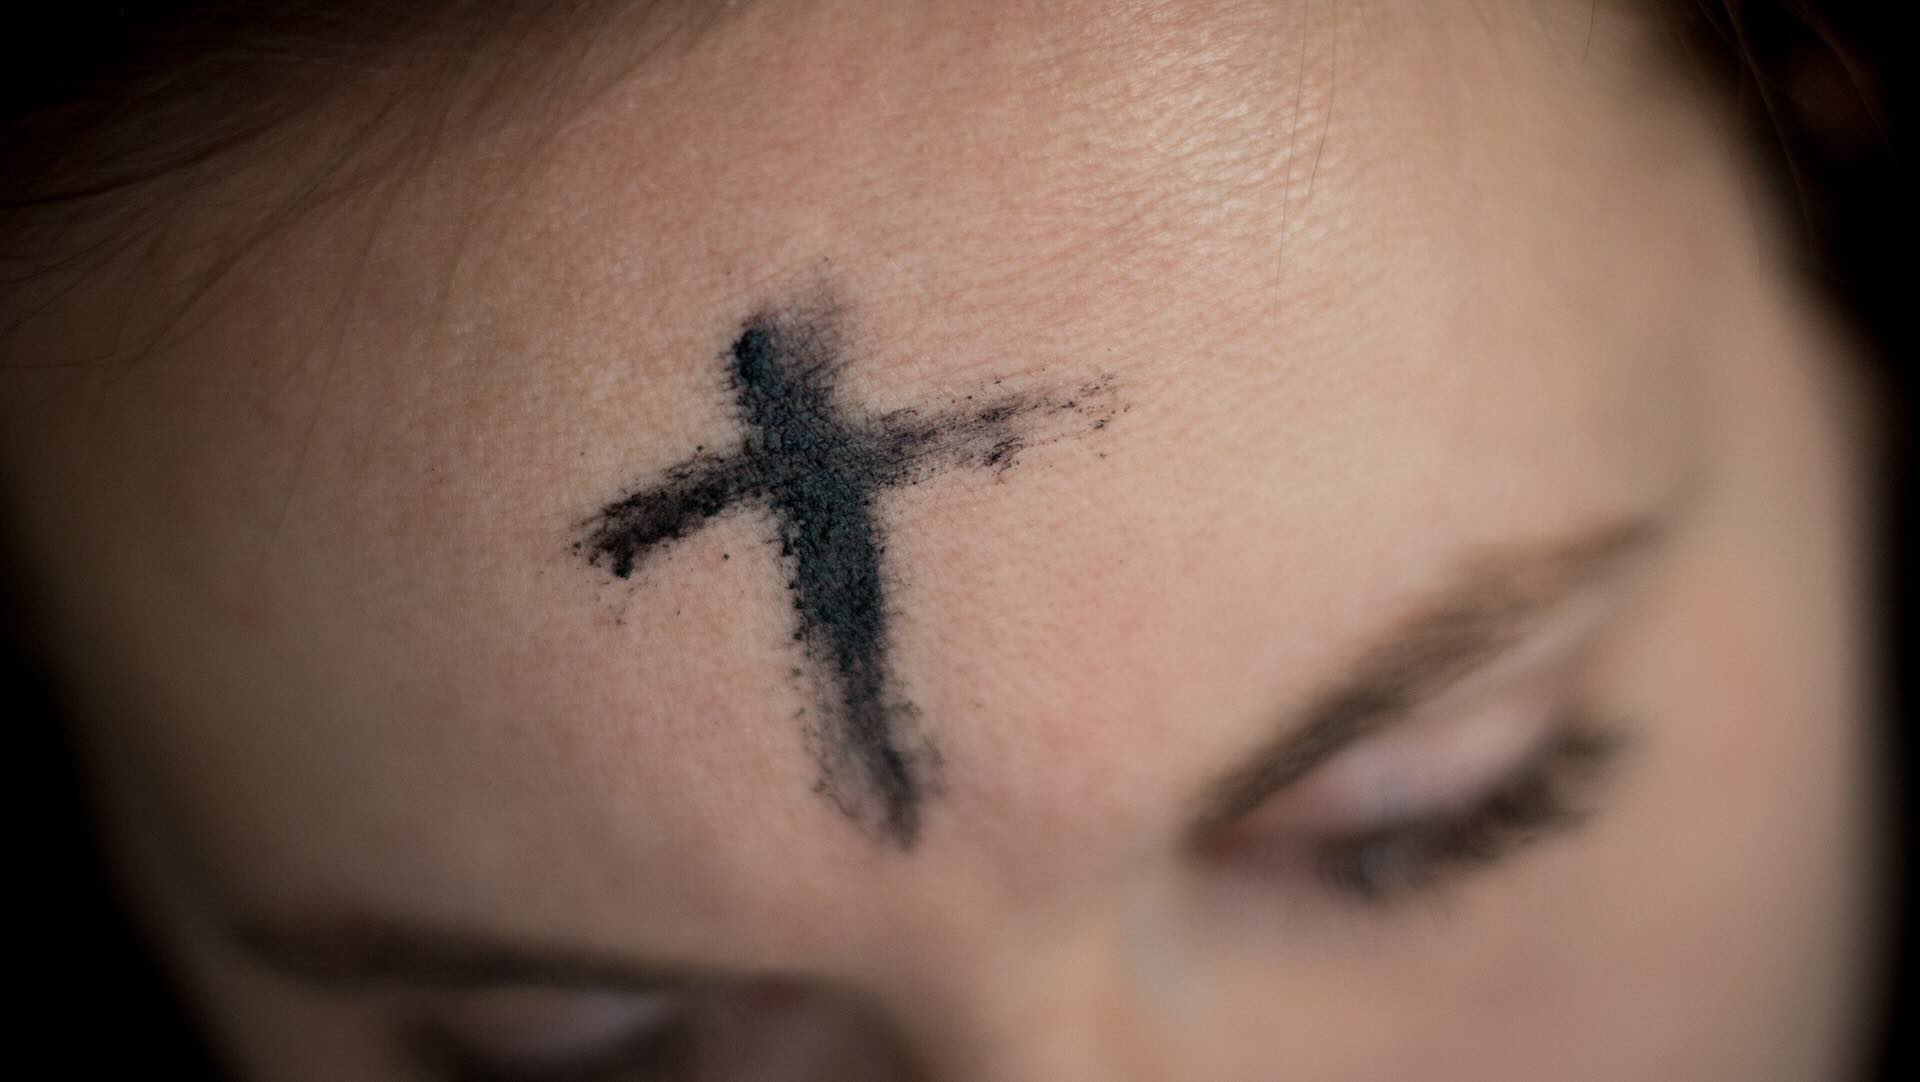 A photo of a person with a cross of ash on their forehead